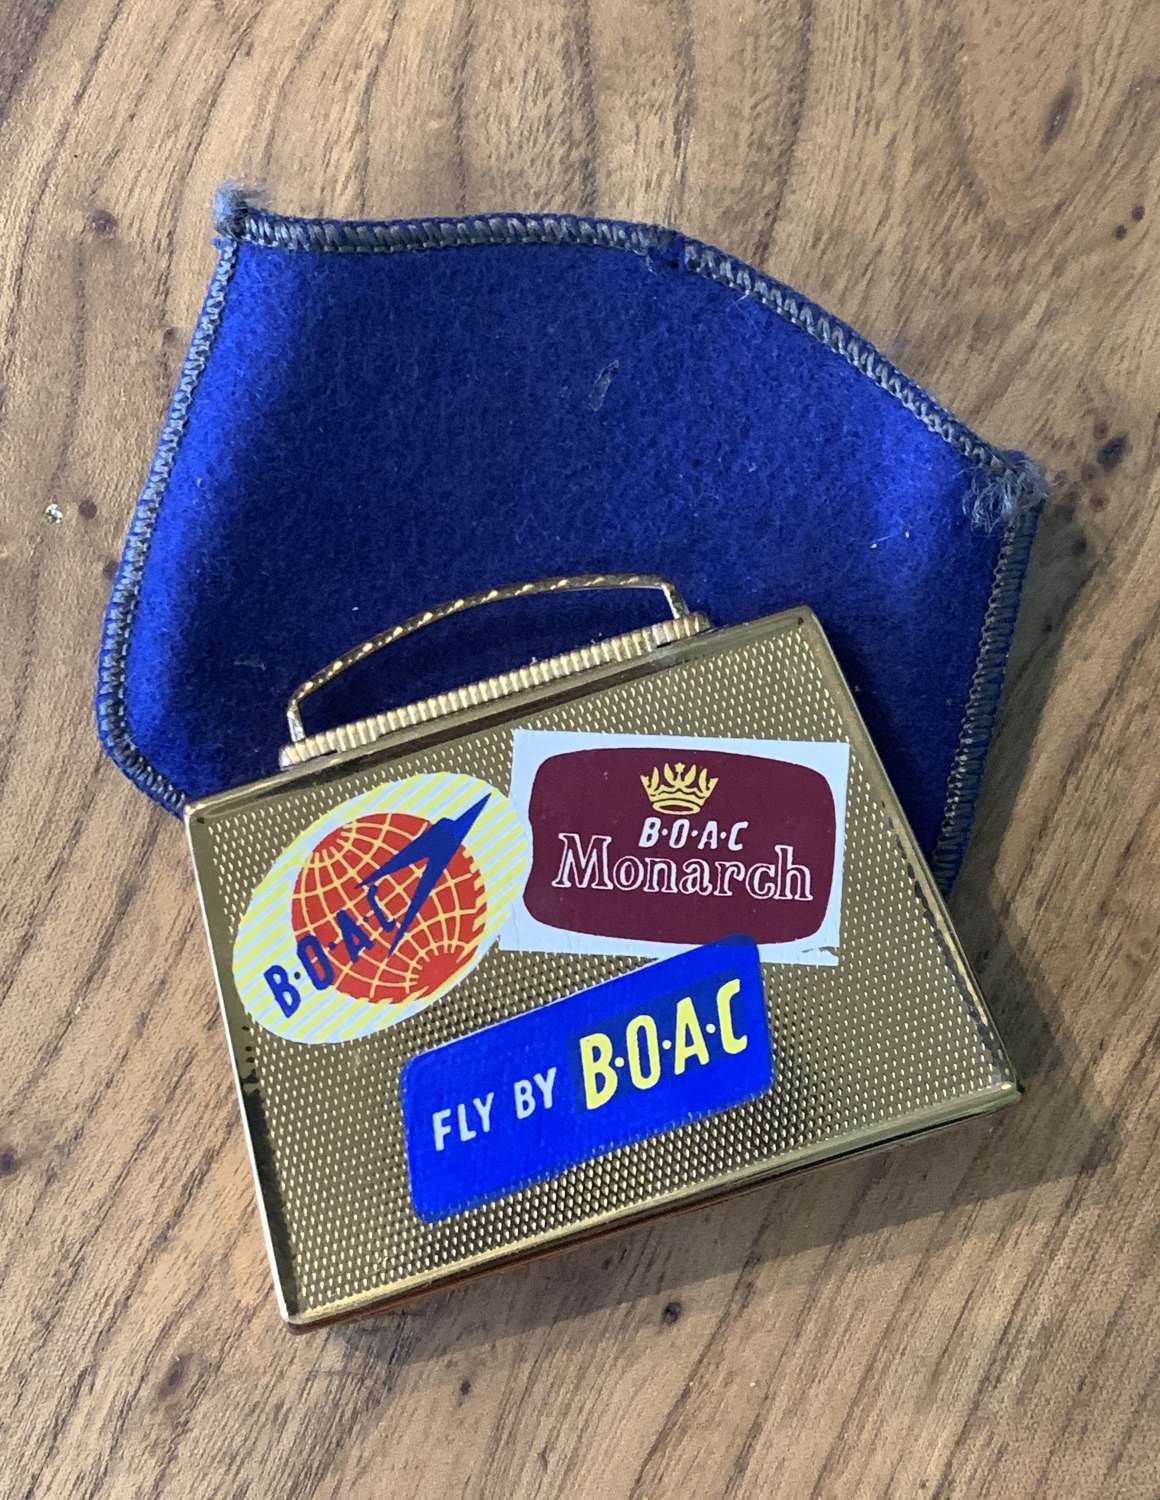 Vintage 1950's ASB Mascot Compact for BOAC Airlines